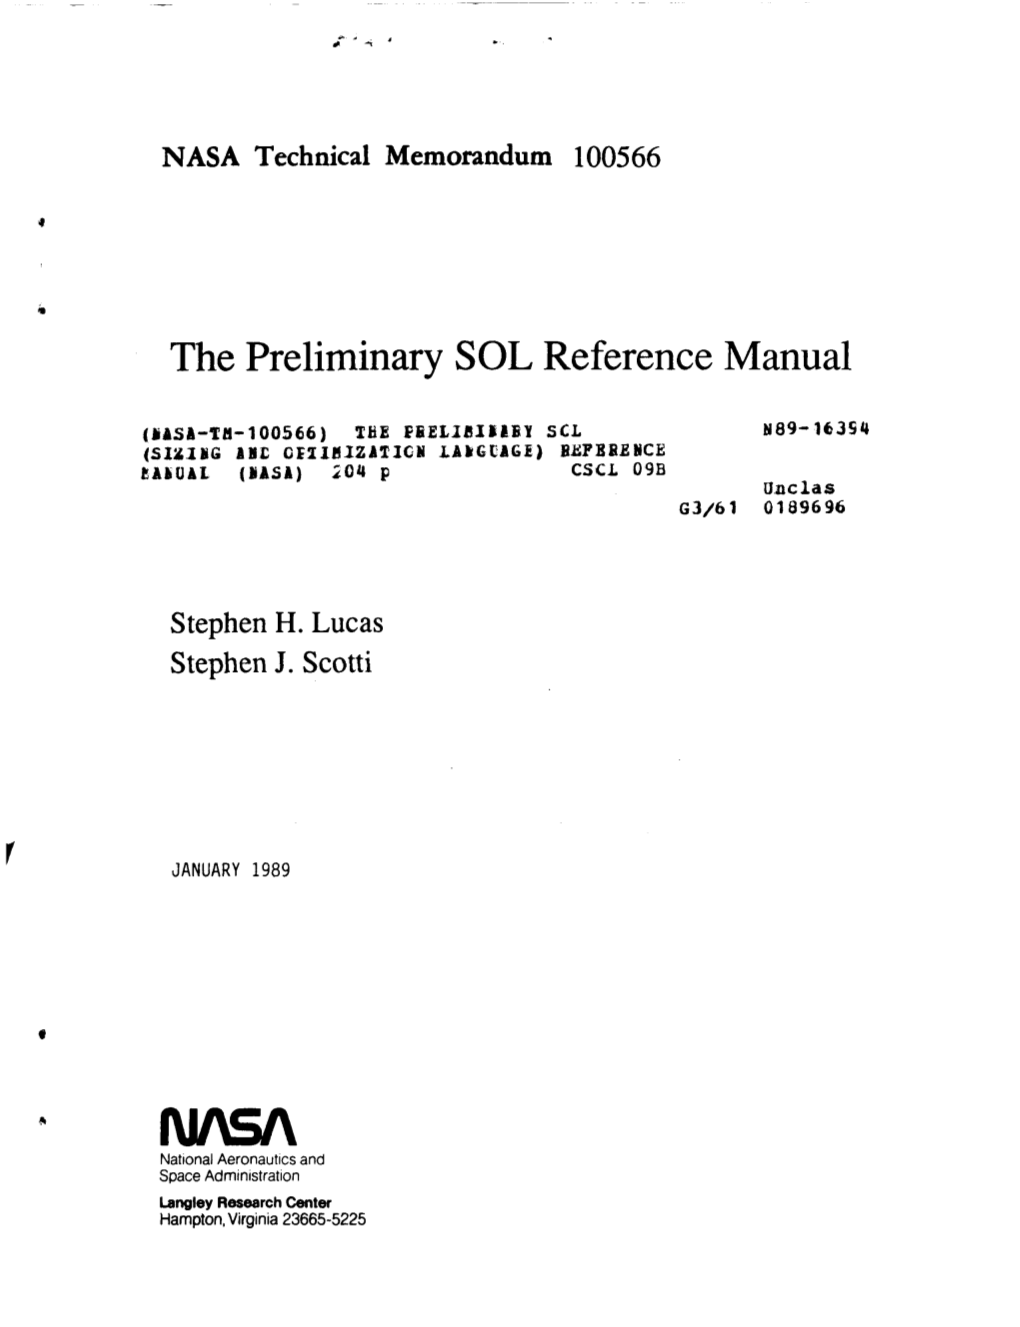 The Preliminary SOL Reference Manual